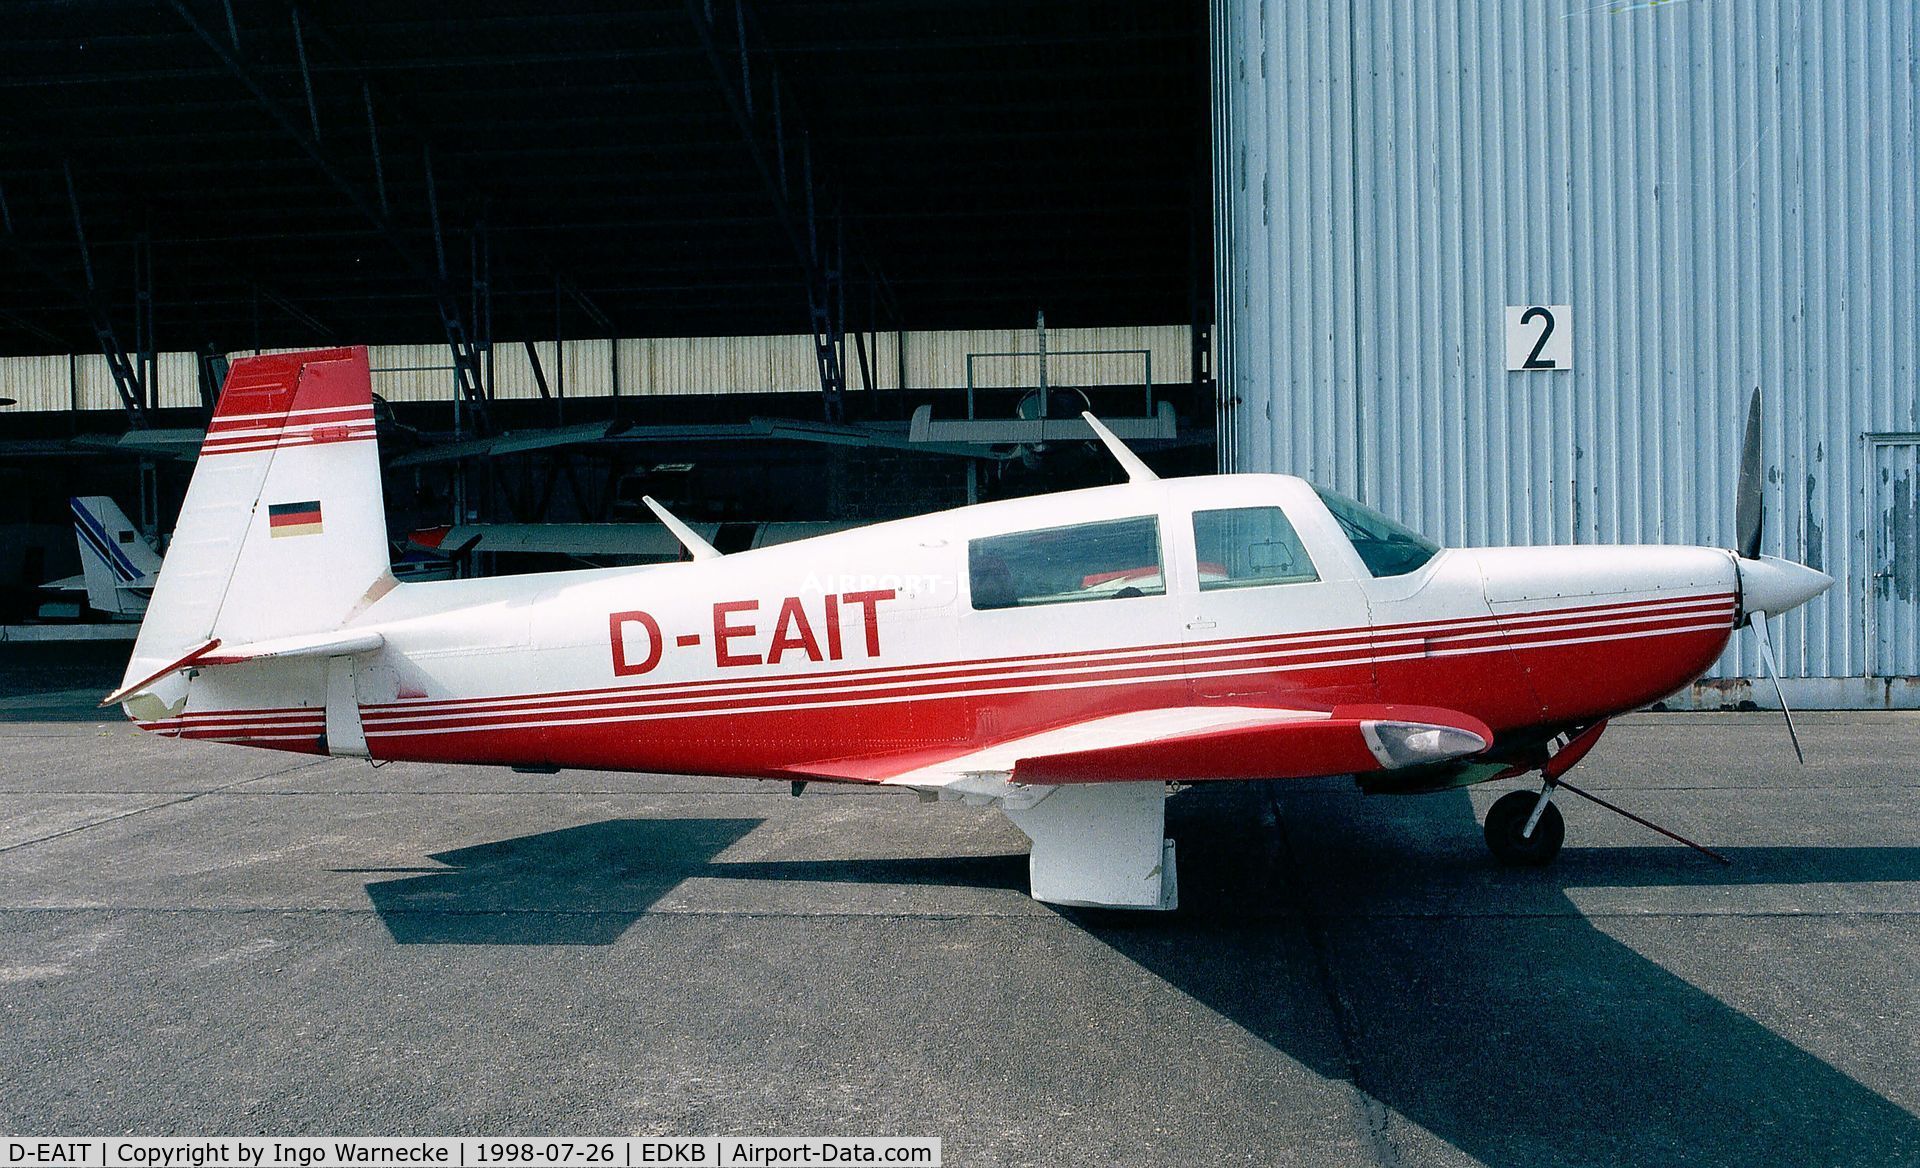 D-EAIT, 1983 Mooney M20K C/N 25-0771, Mooney M20K Model 231 at Bonn-Hangelar airfield